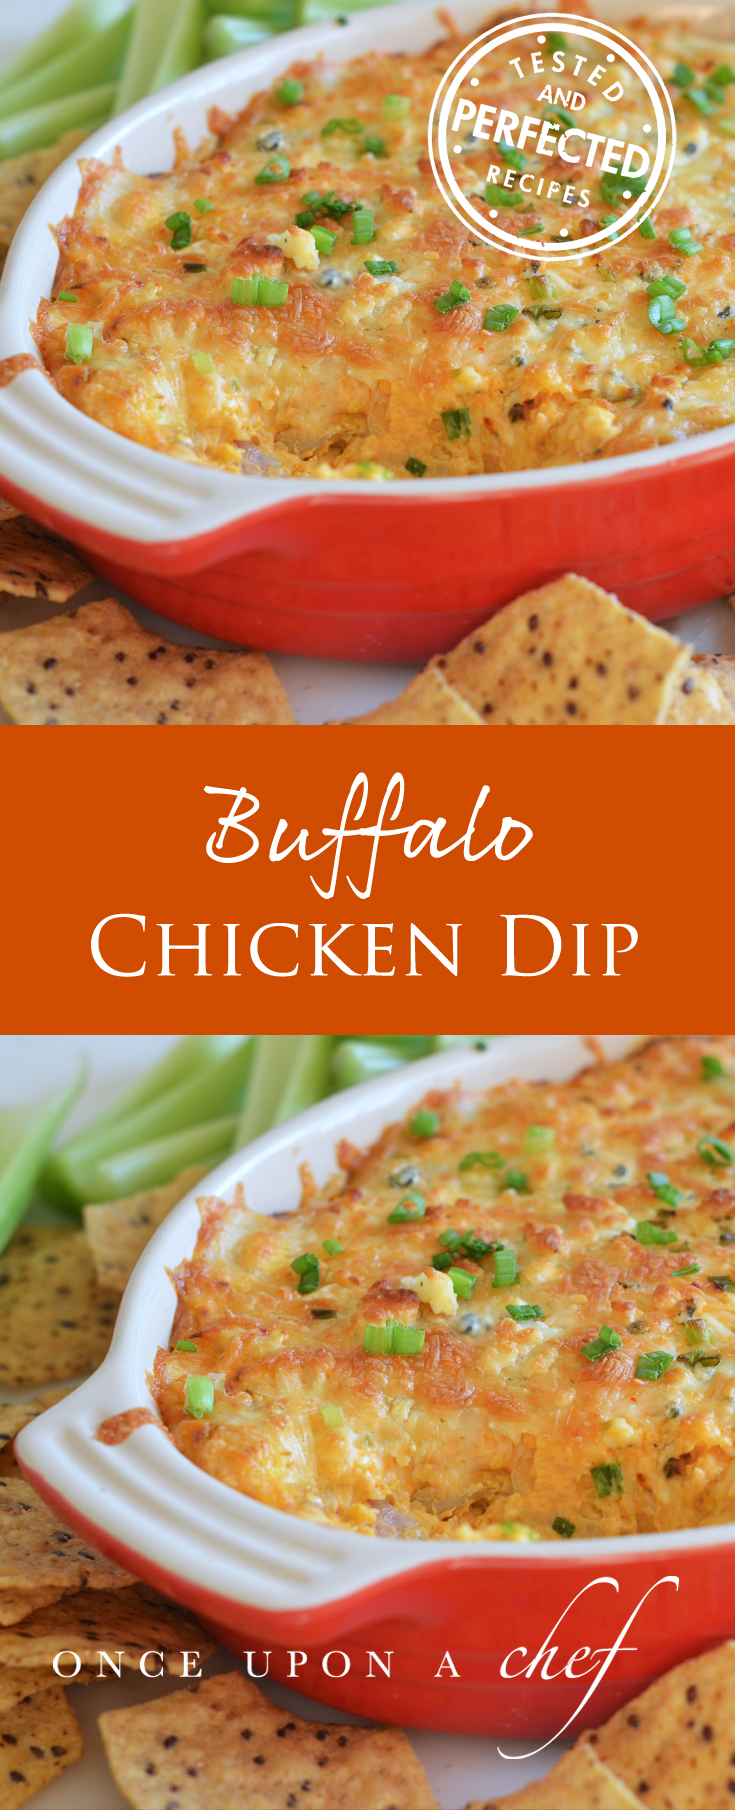 Buffalo Chicken Dip - Once Upon a Chef